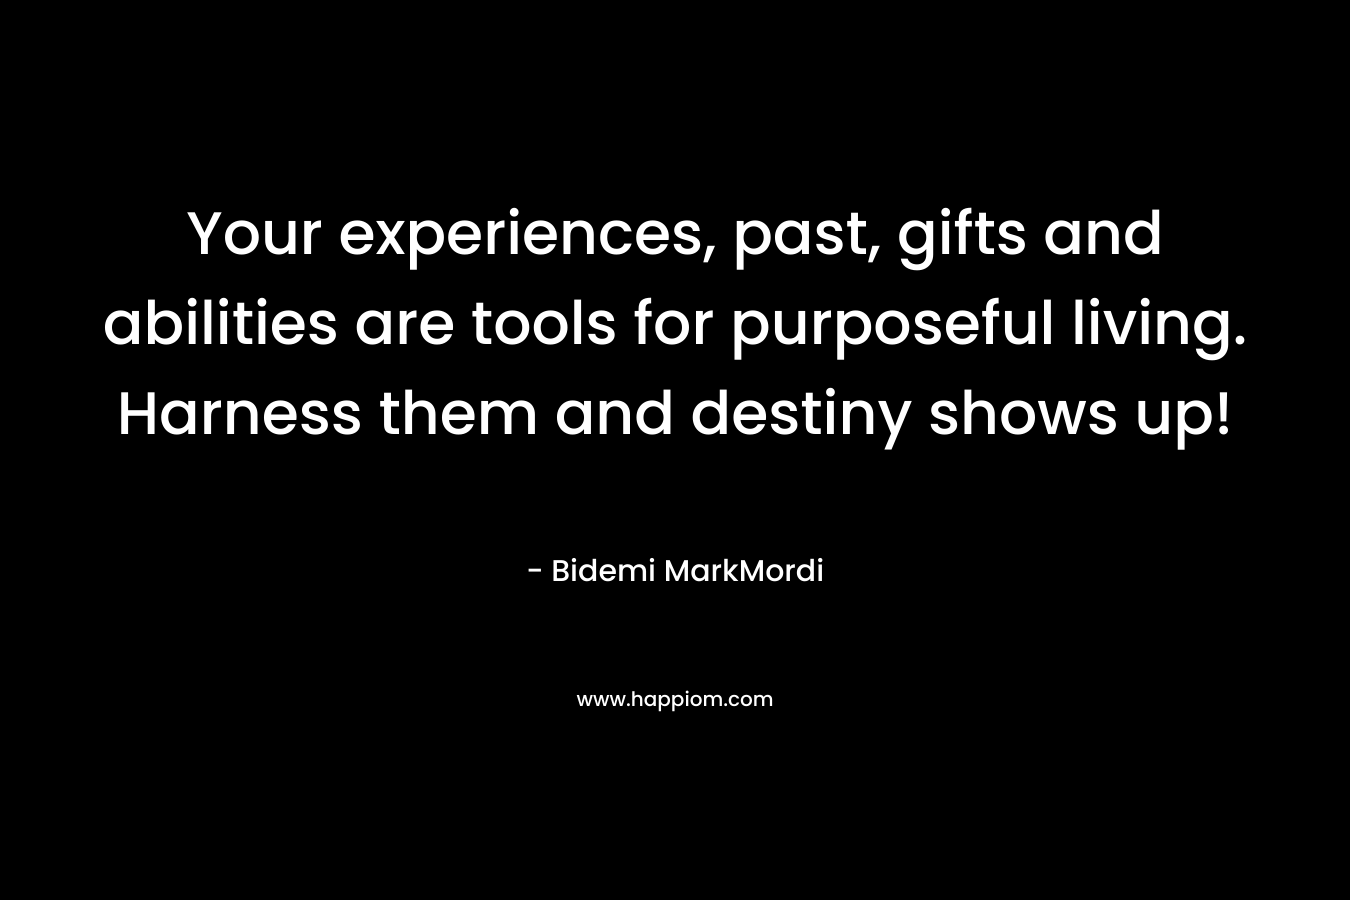 Your experiences, past, gifts and abilities are tools for purposeful living. Harness them and destiny shows up!